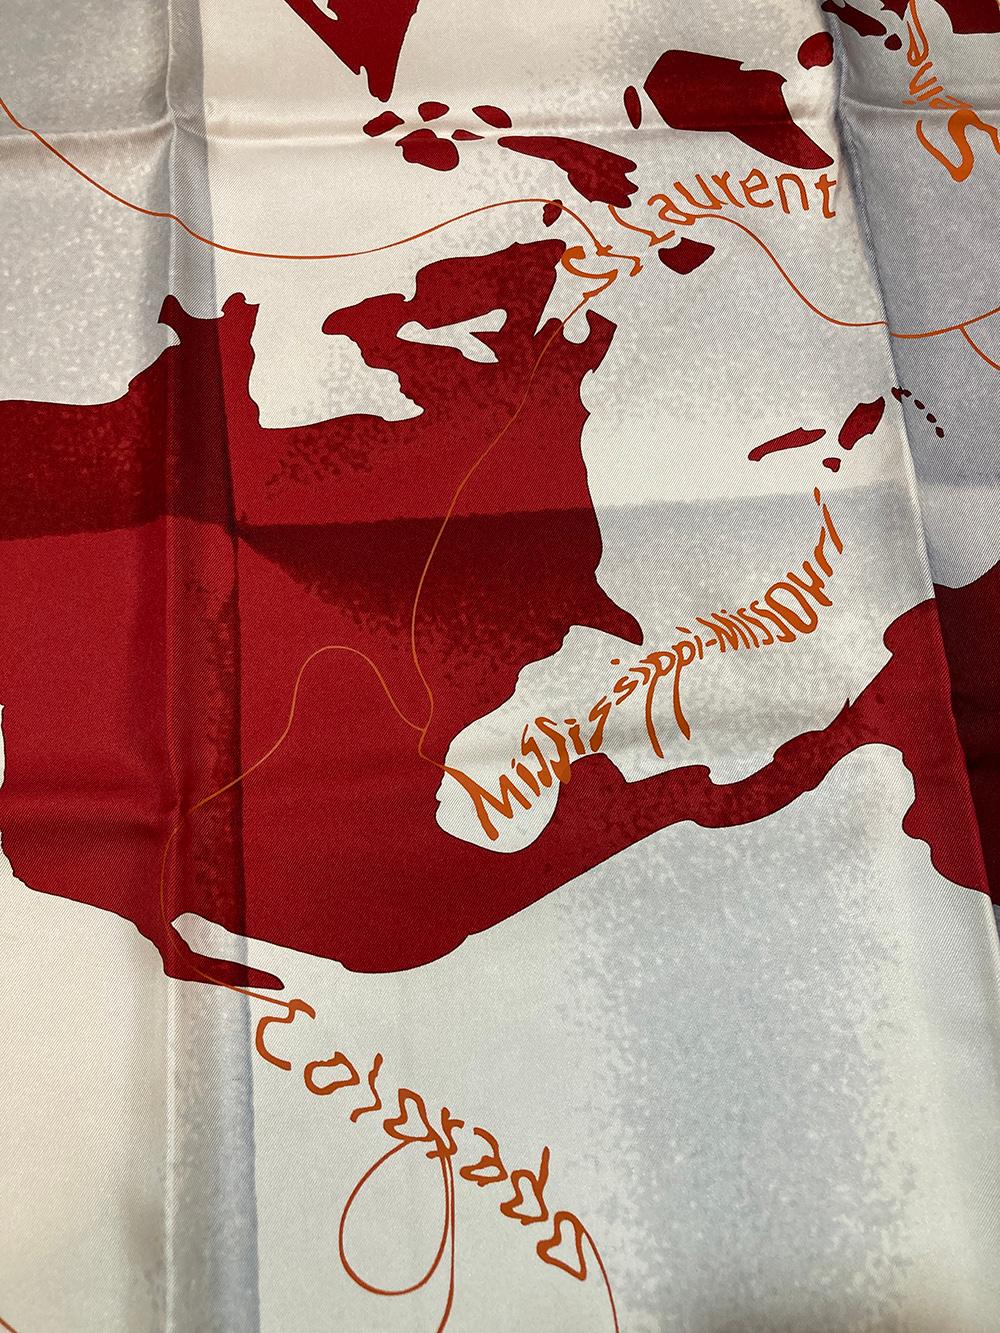 Hermes Le Monde est une Fleuve World Print Silk Scarf in Red in excellent condition. Original silk screen design c2005 by Bali Barret features a unique world map print with all the global continents in red over a gray and white background with thin